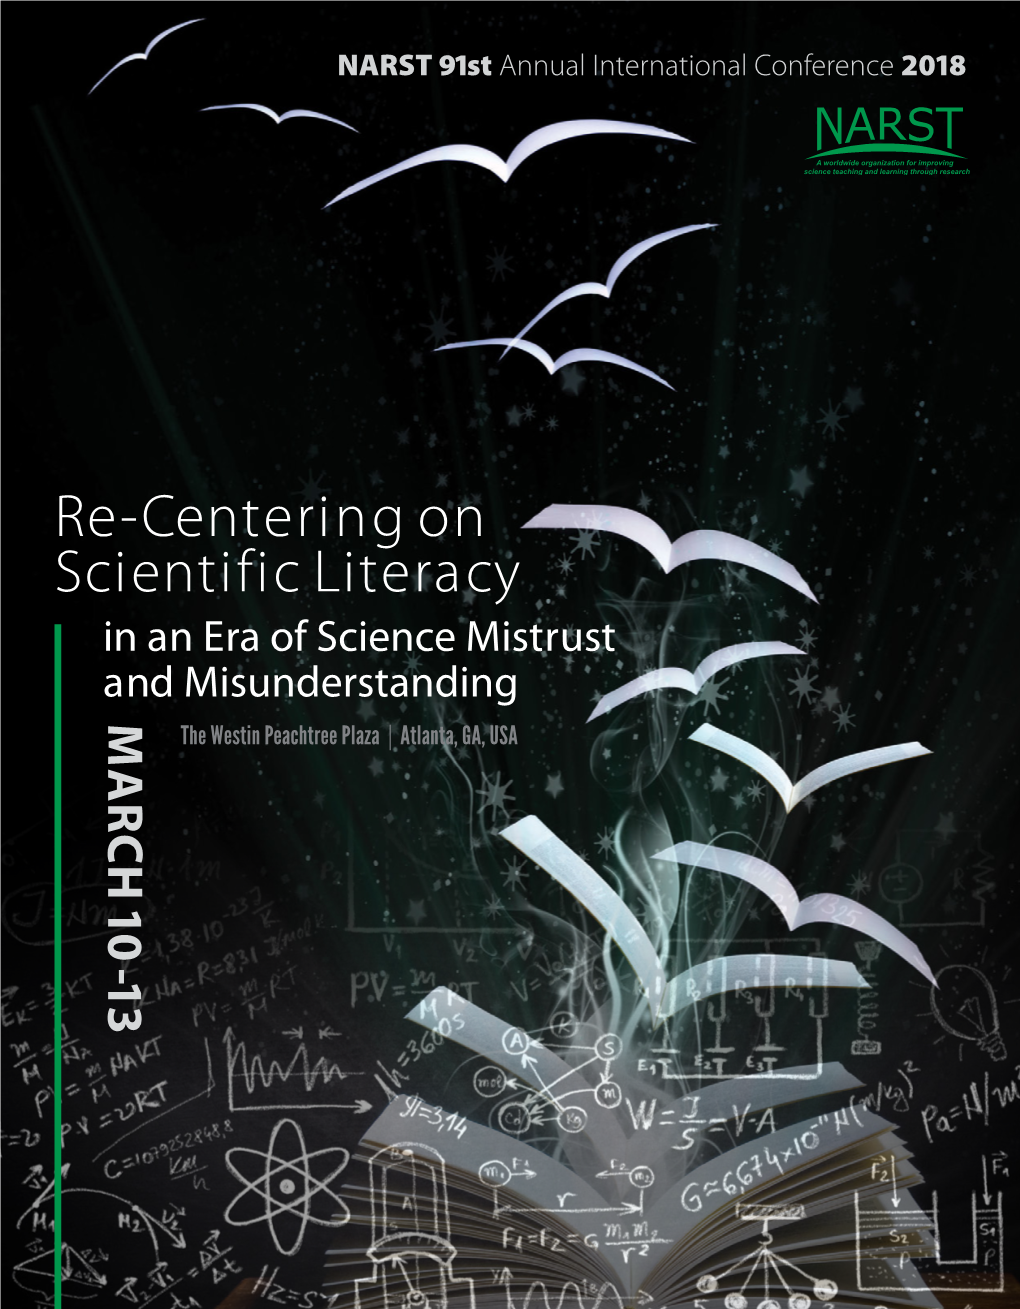 Re-Centering on Scientific Literacy in an Era of Science Mistrust and Misunderstanding MARCH 10 - 10 13 MARCH the Westin Peachtree Plaza | Atlanta, GA, USA